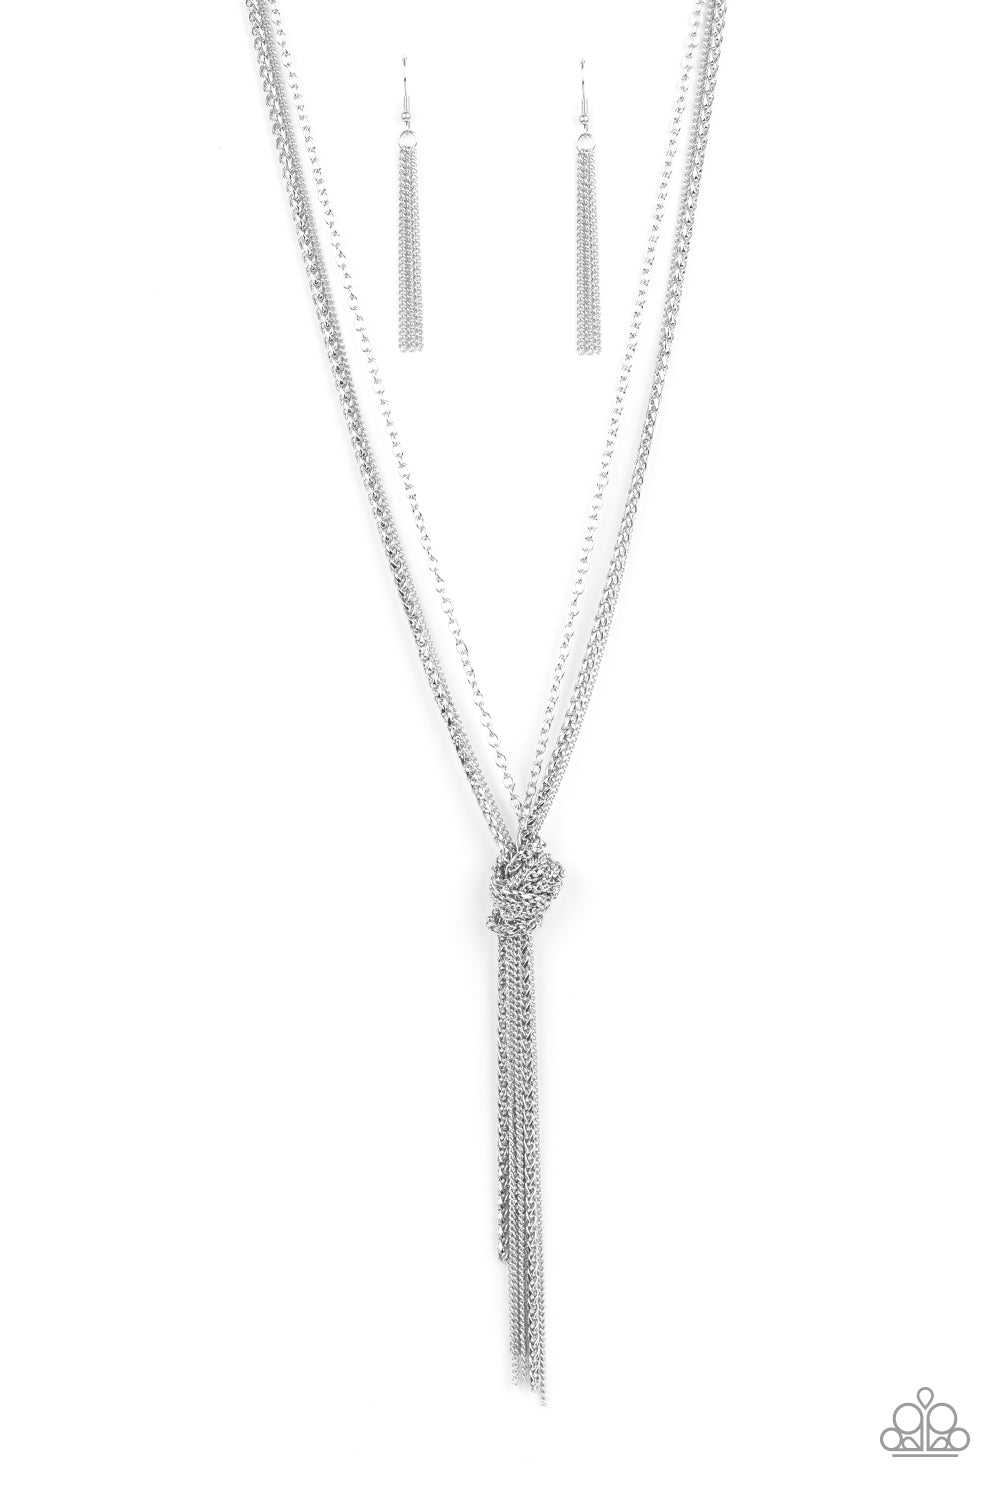 KNOT All There - Silver Tassel Necklaces an edgy collection of mismatched silver chains knot into an intense fringe, adding a bold industrial influence to any outfit. Features an adjustable clasp closure.  Sold as one individual necklace. Includes one pair of matching earrings.